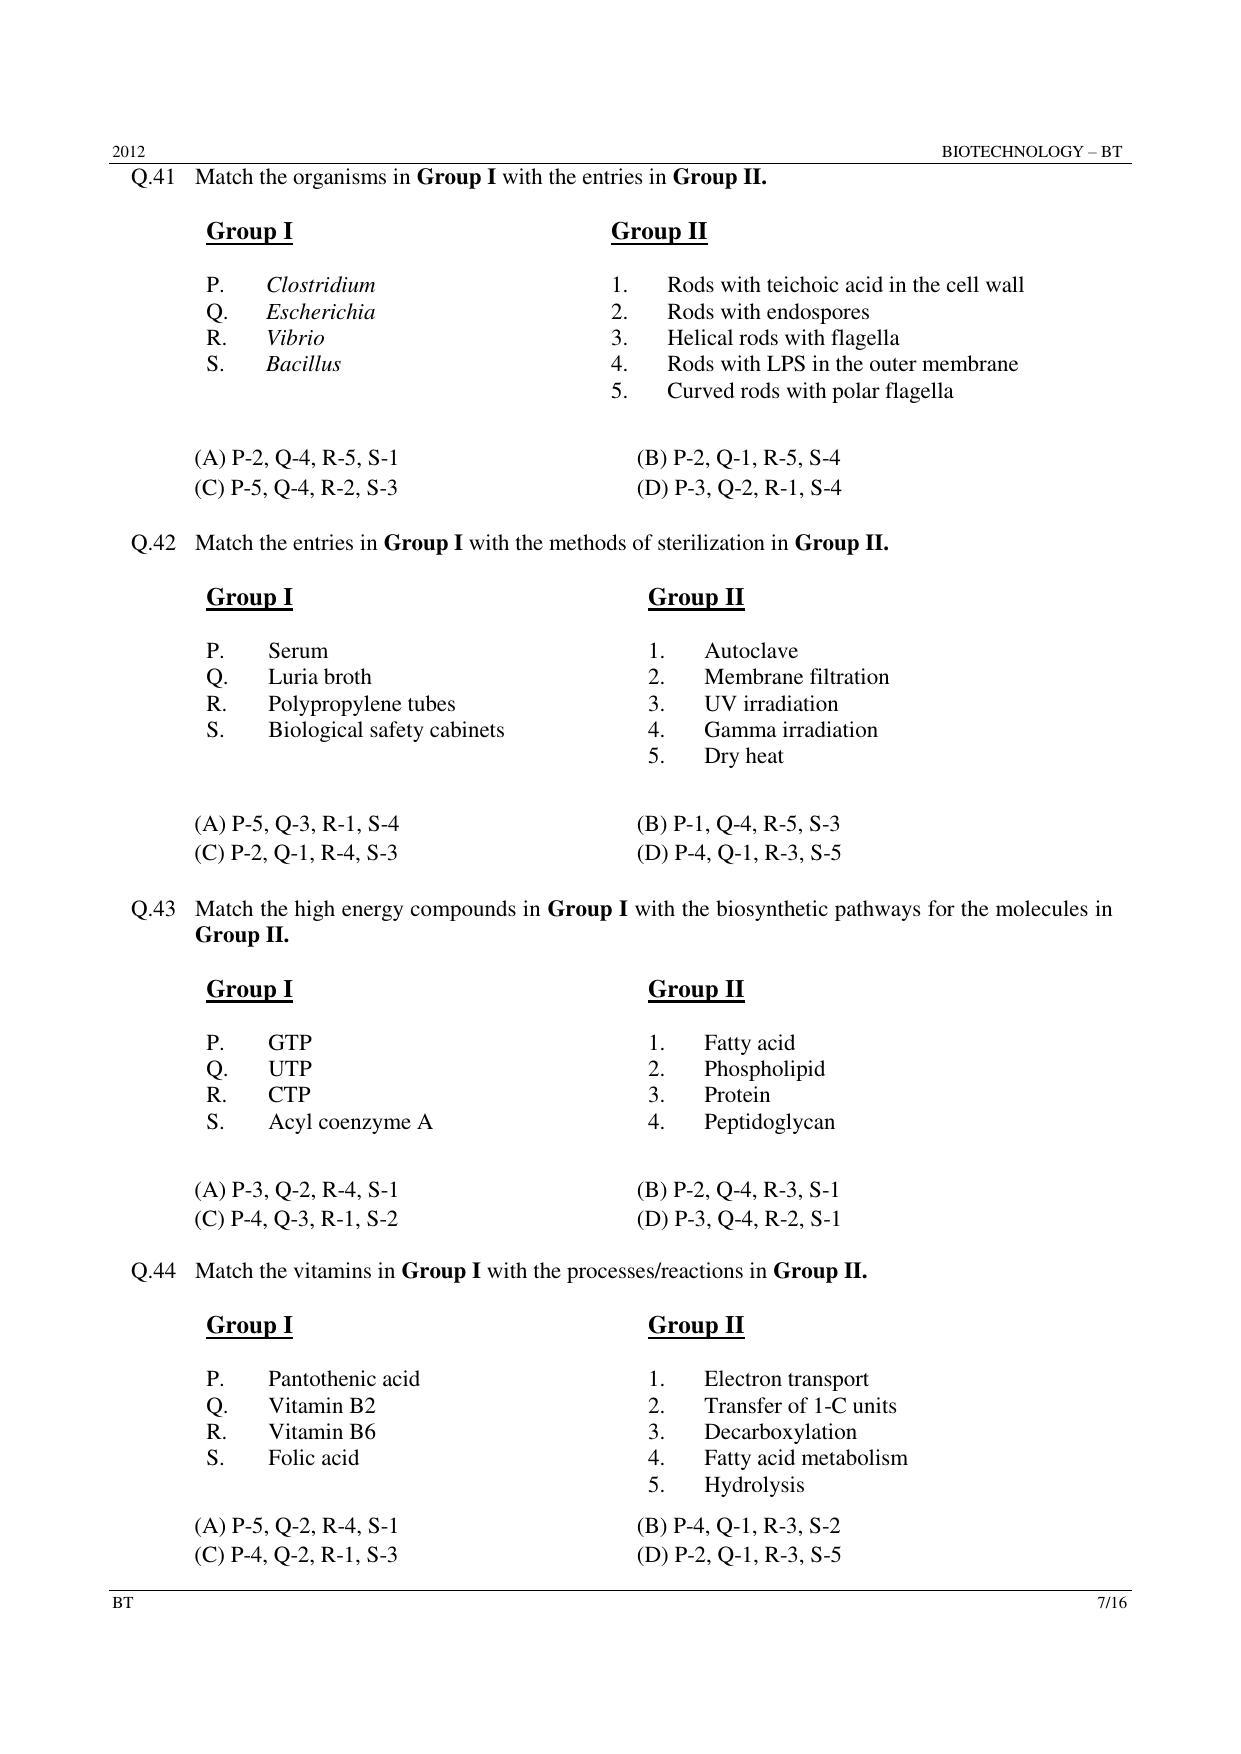 GATE 2012 Biotechnology (BT) Question Paper with Answer Key - Page 7